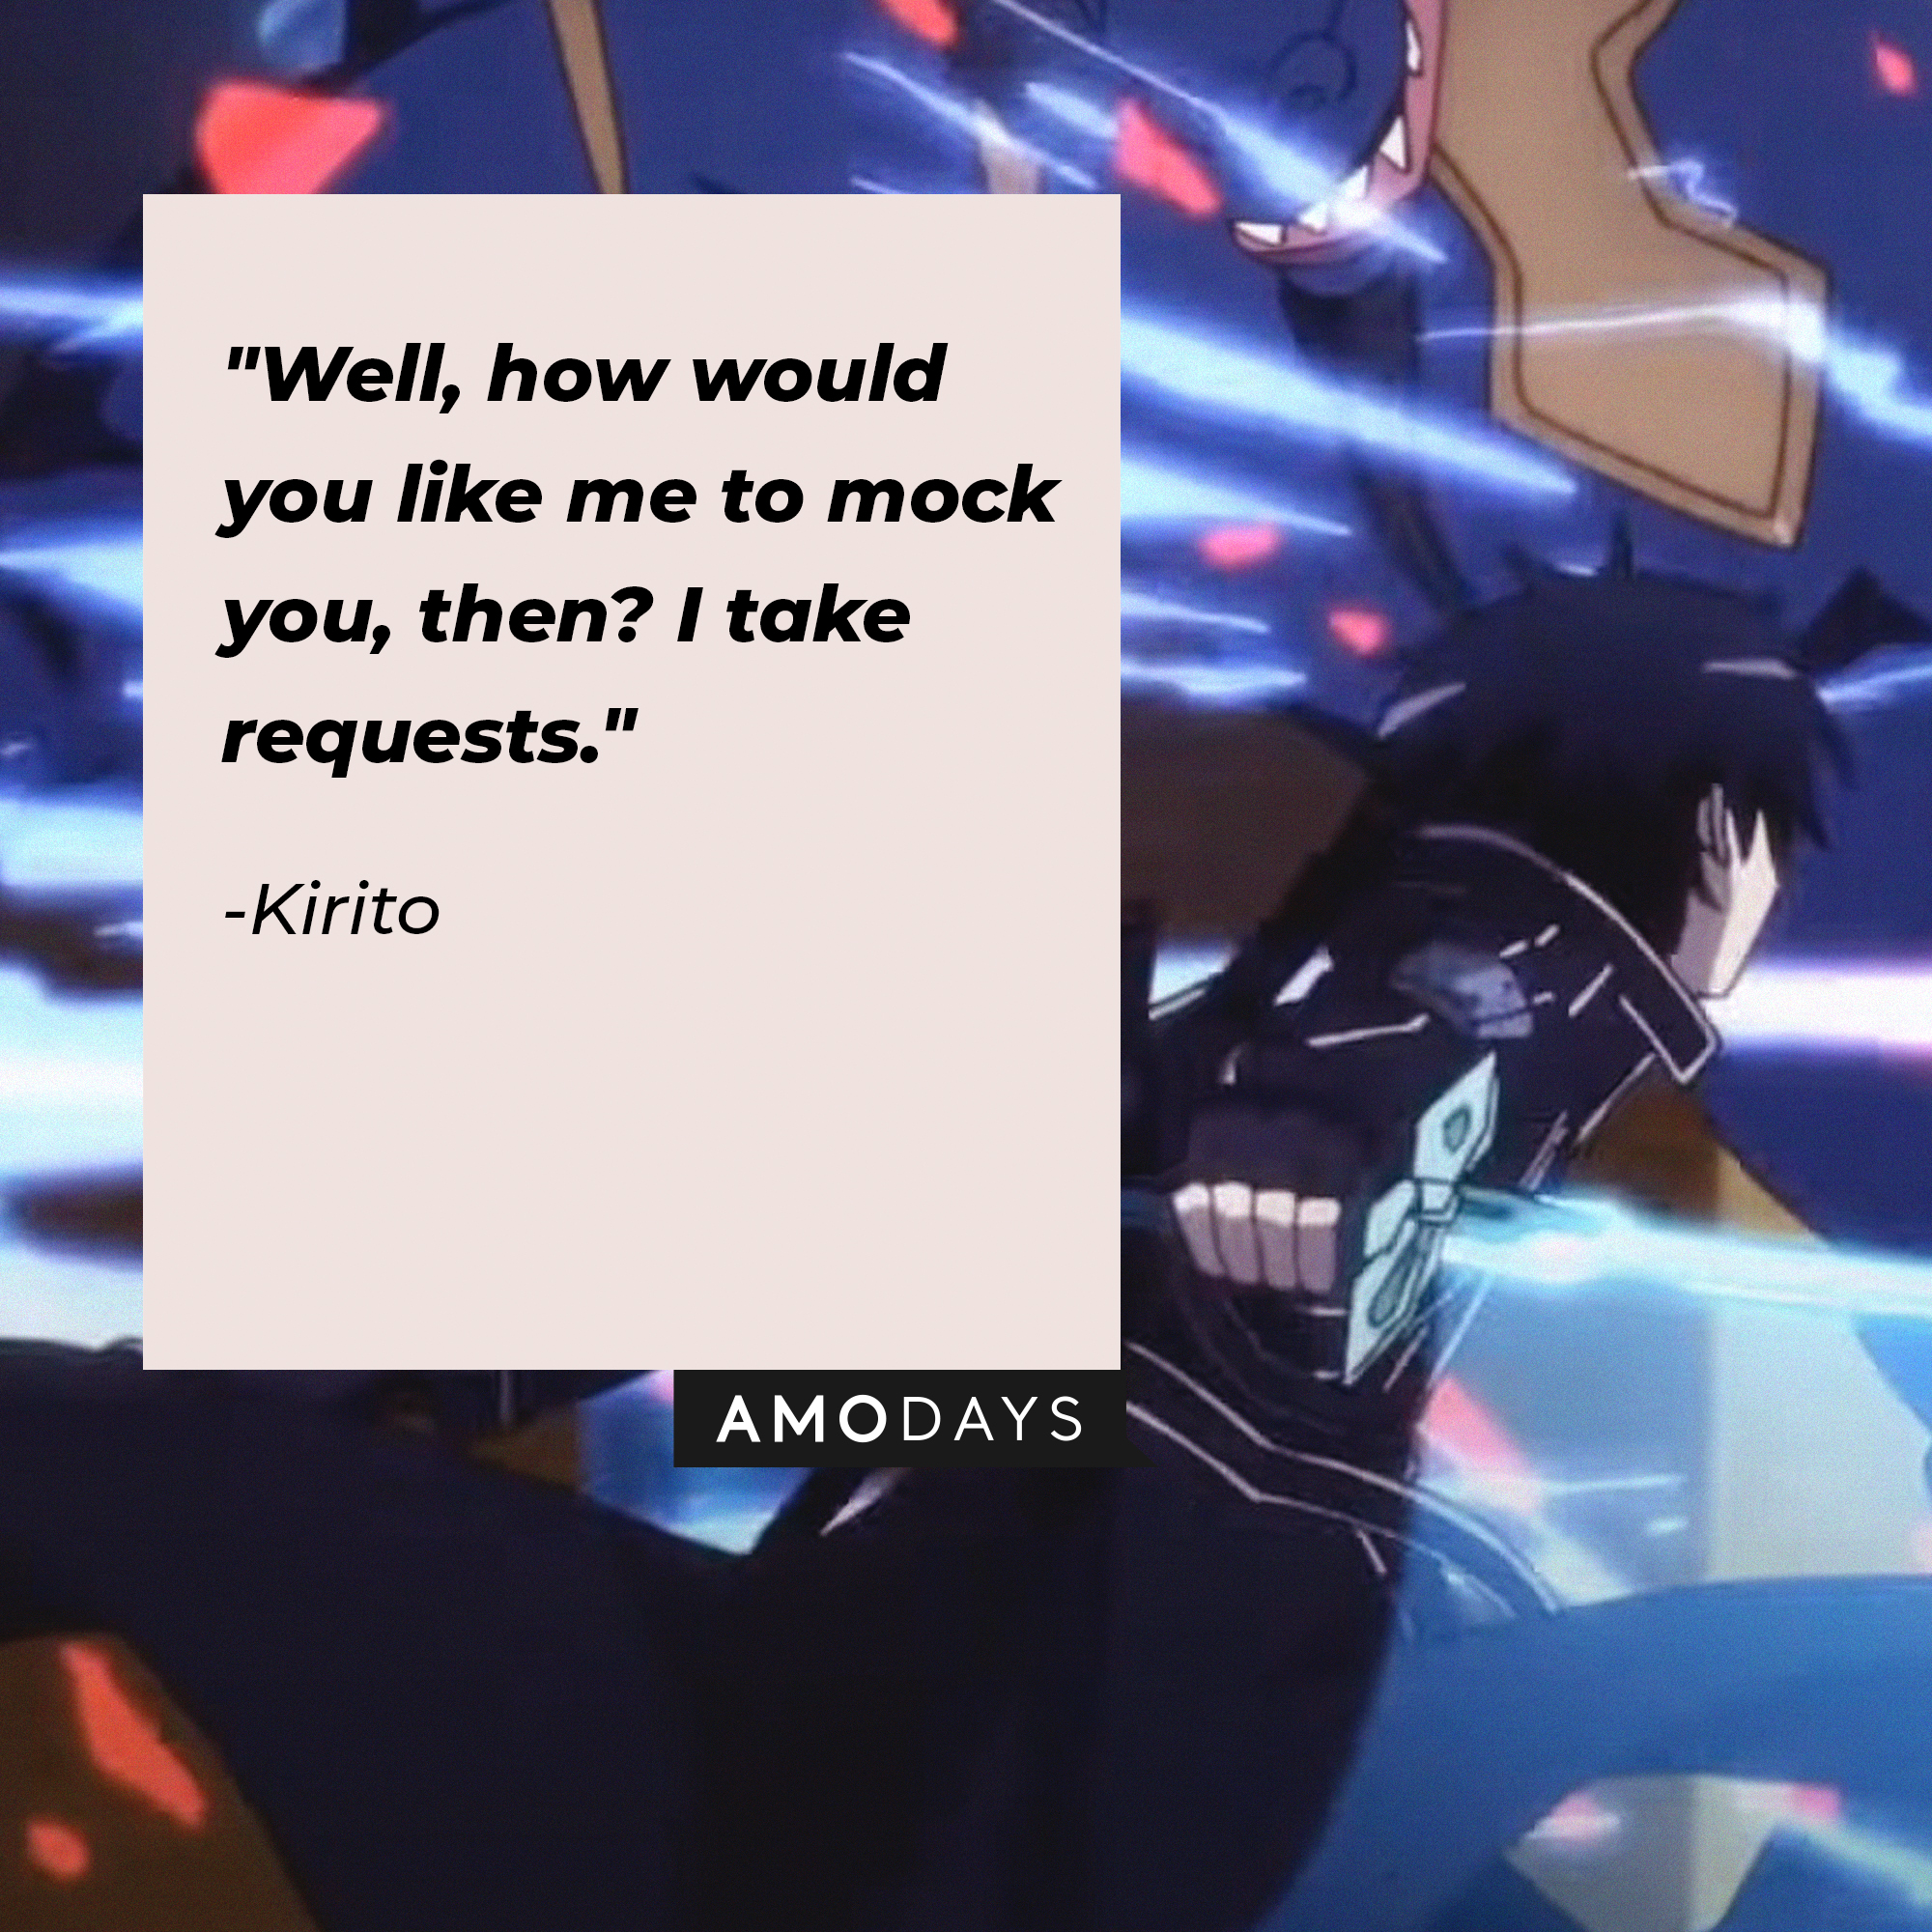 Kirito's quote: "Well, how would you like me to mock you, then? I take requests." | Source: Facebook.com/SwordArtOnlineUSA